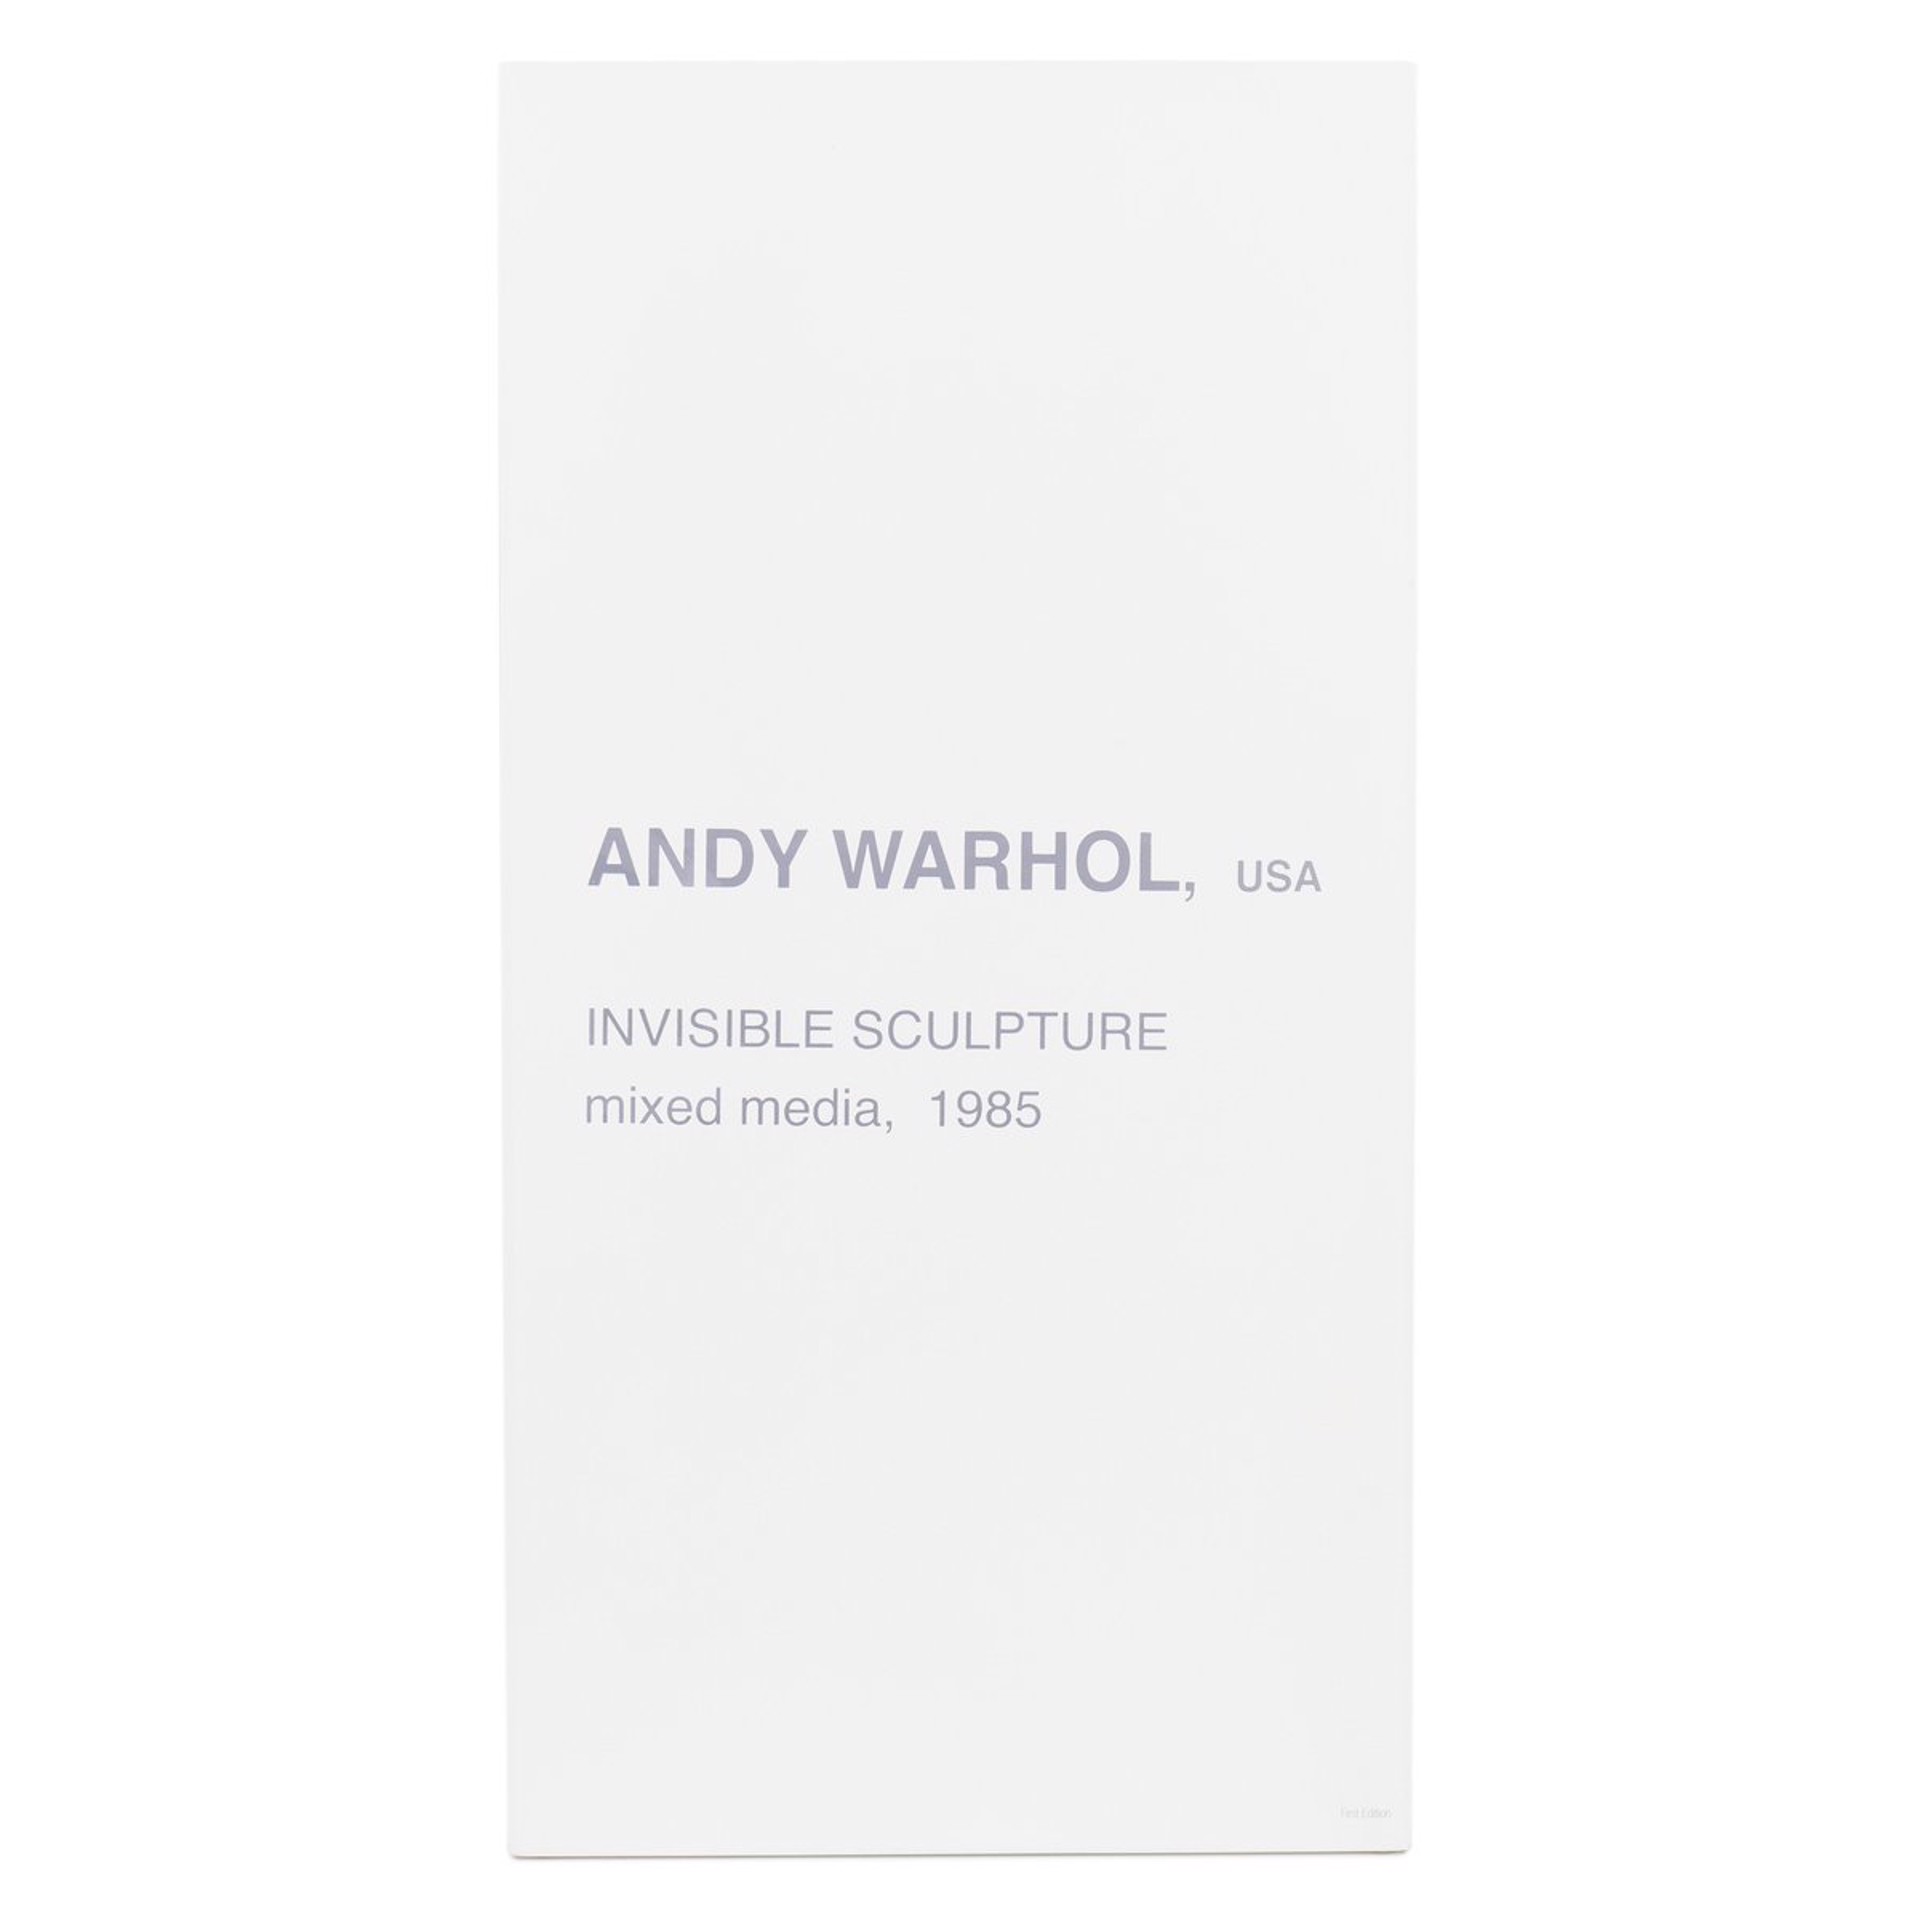 ANDY WARHOL THE INVISIBLE SCULPTURE by Andy Warhol